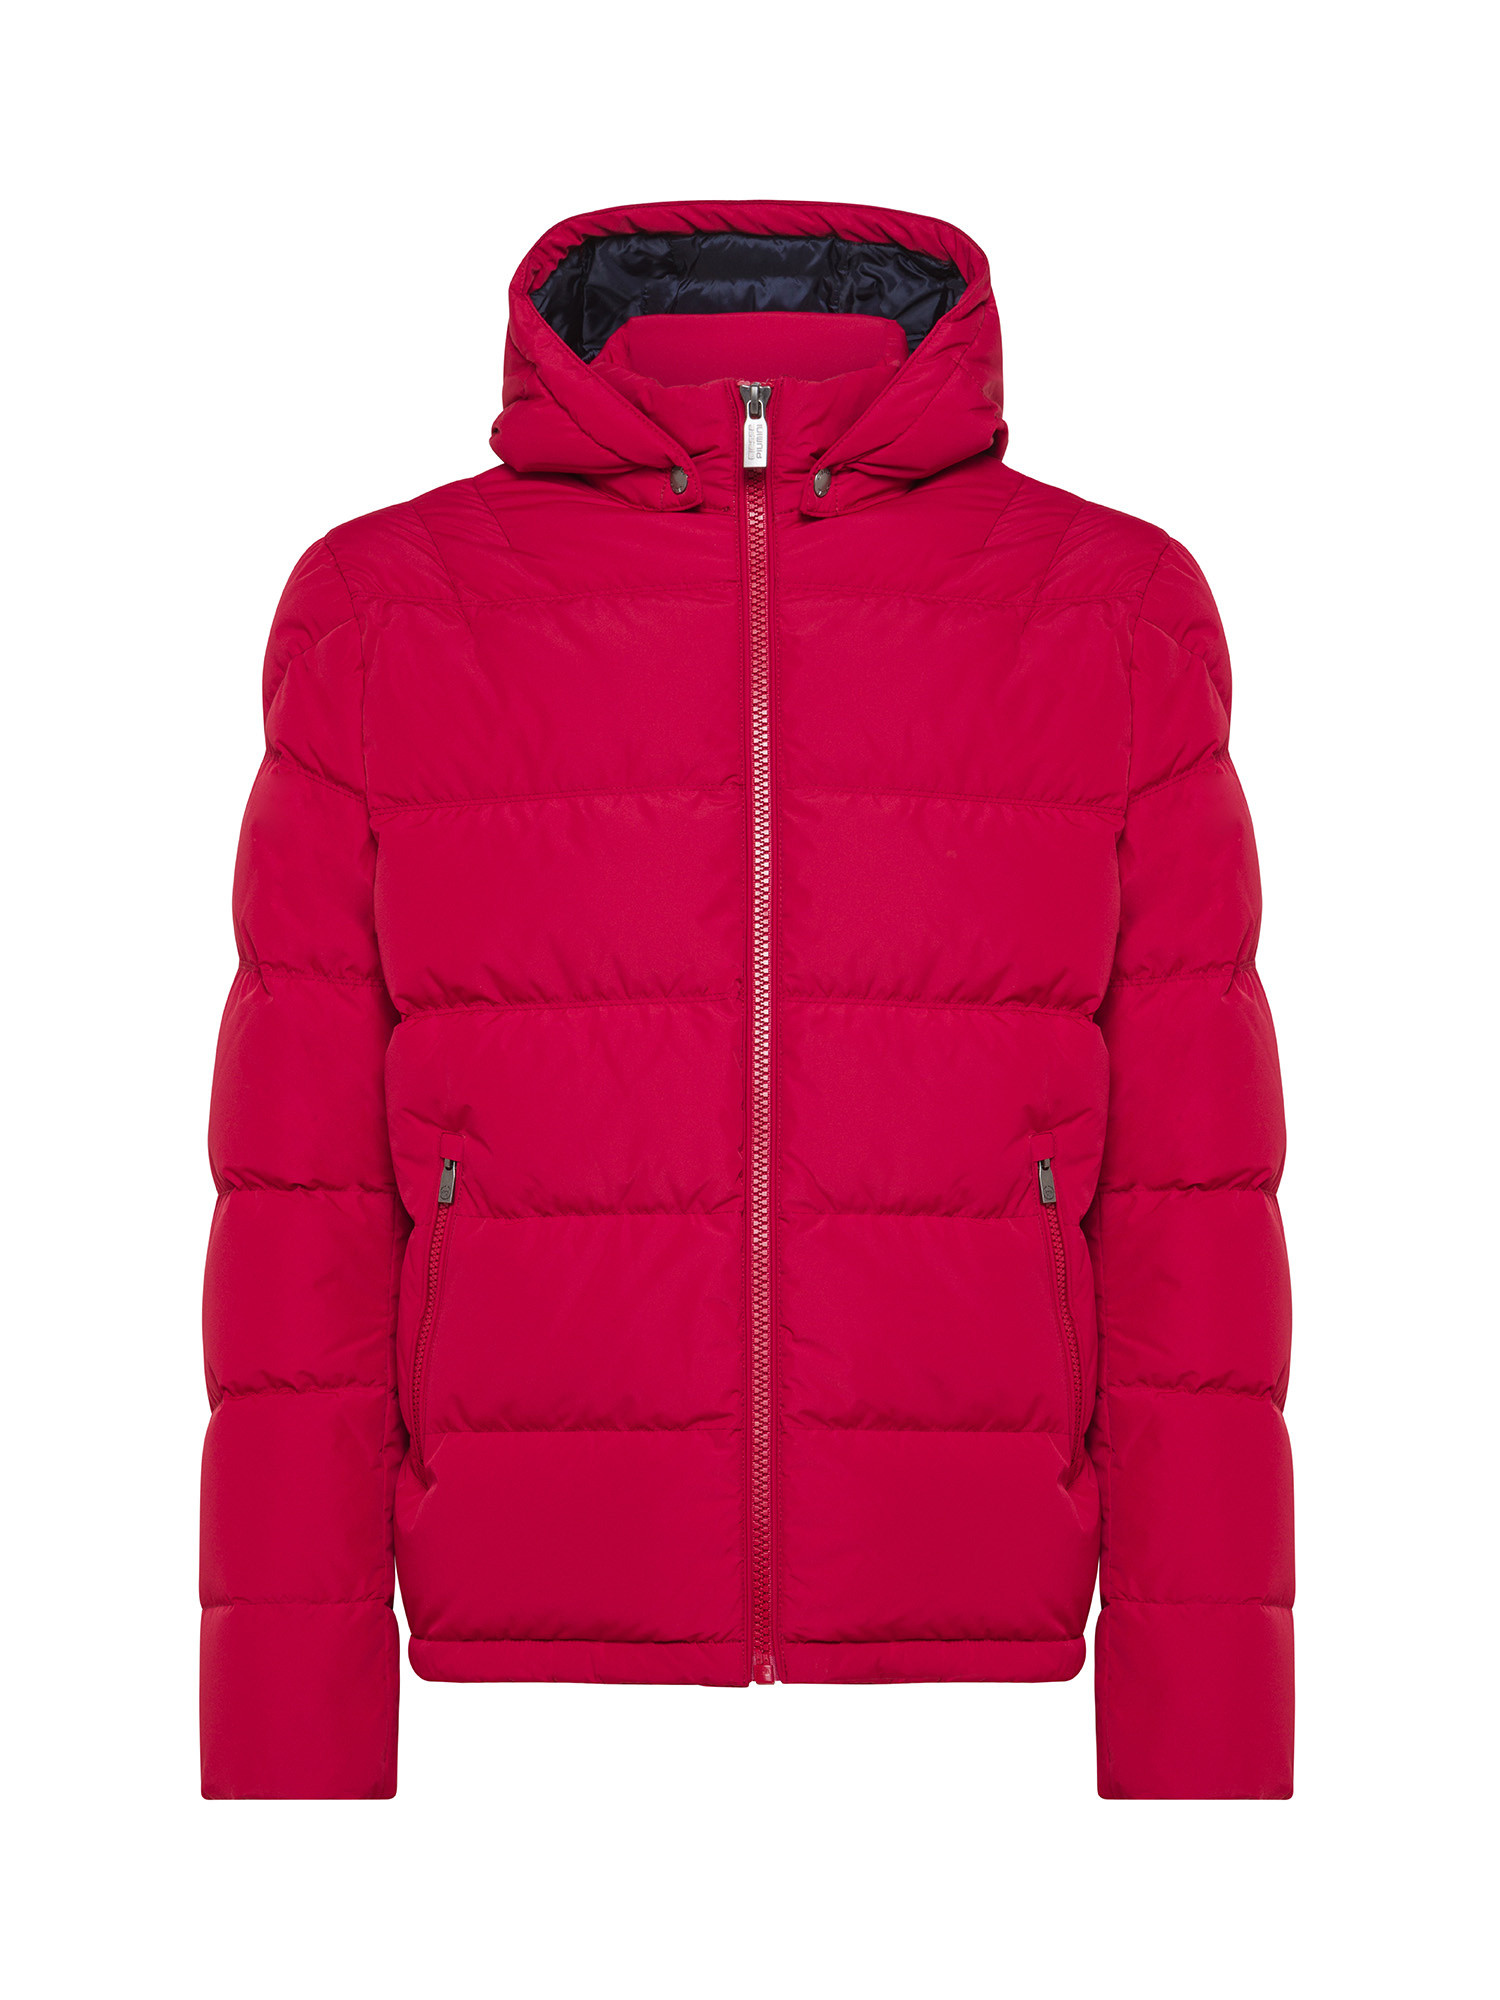 Ciesse Piumini - Down jacket with hood, Red, large image number 0